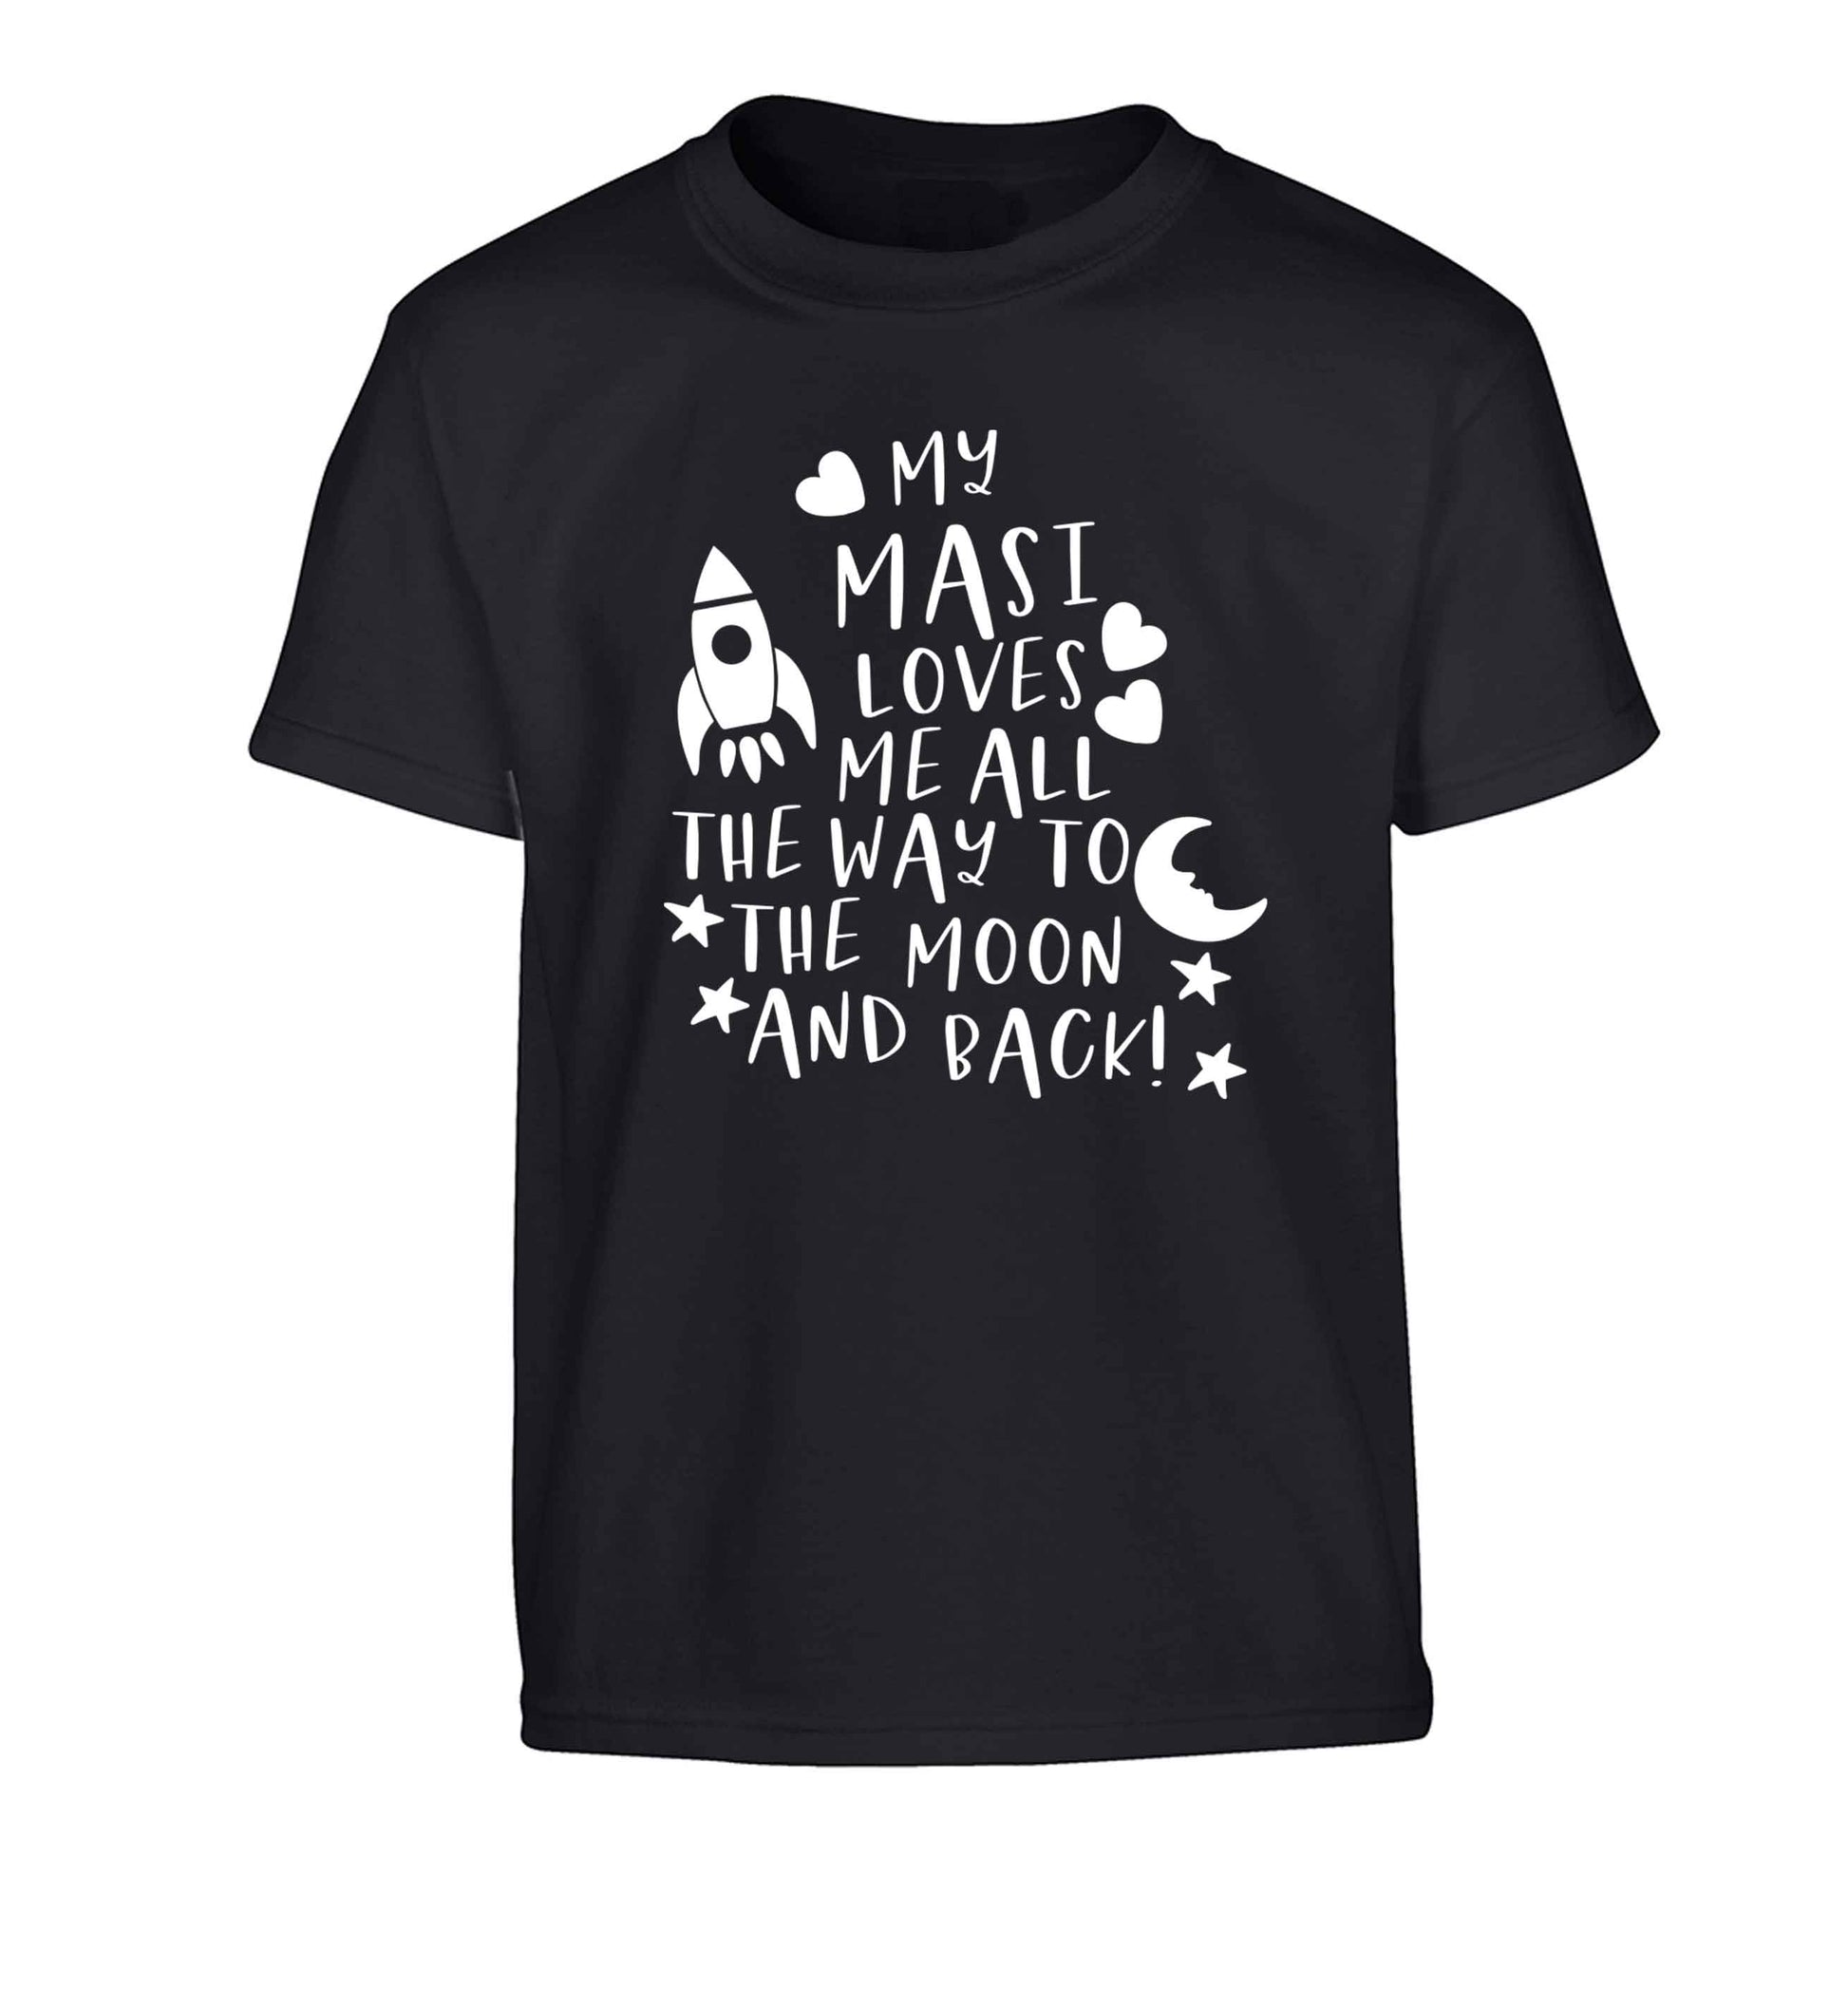 My masi loves me all the way to the moon and back Children's black Tshirt 12-13 Years